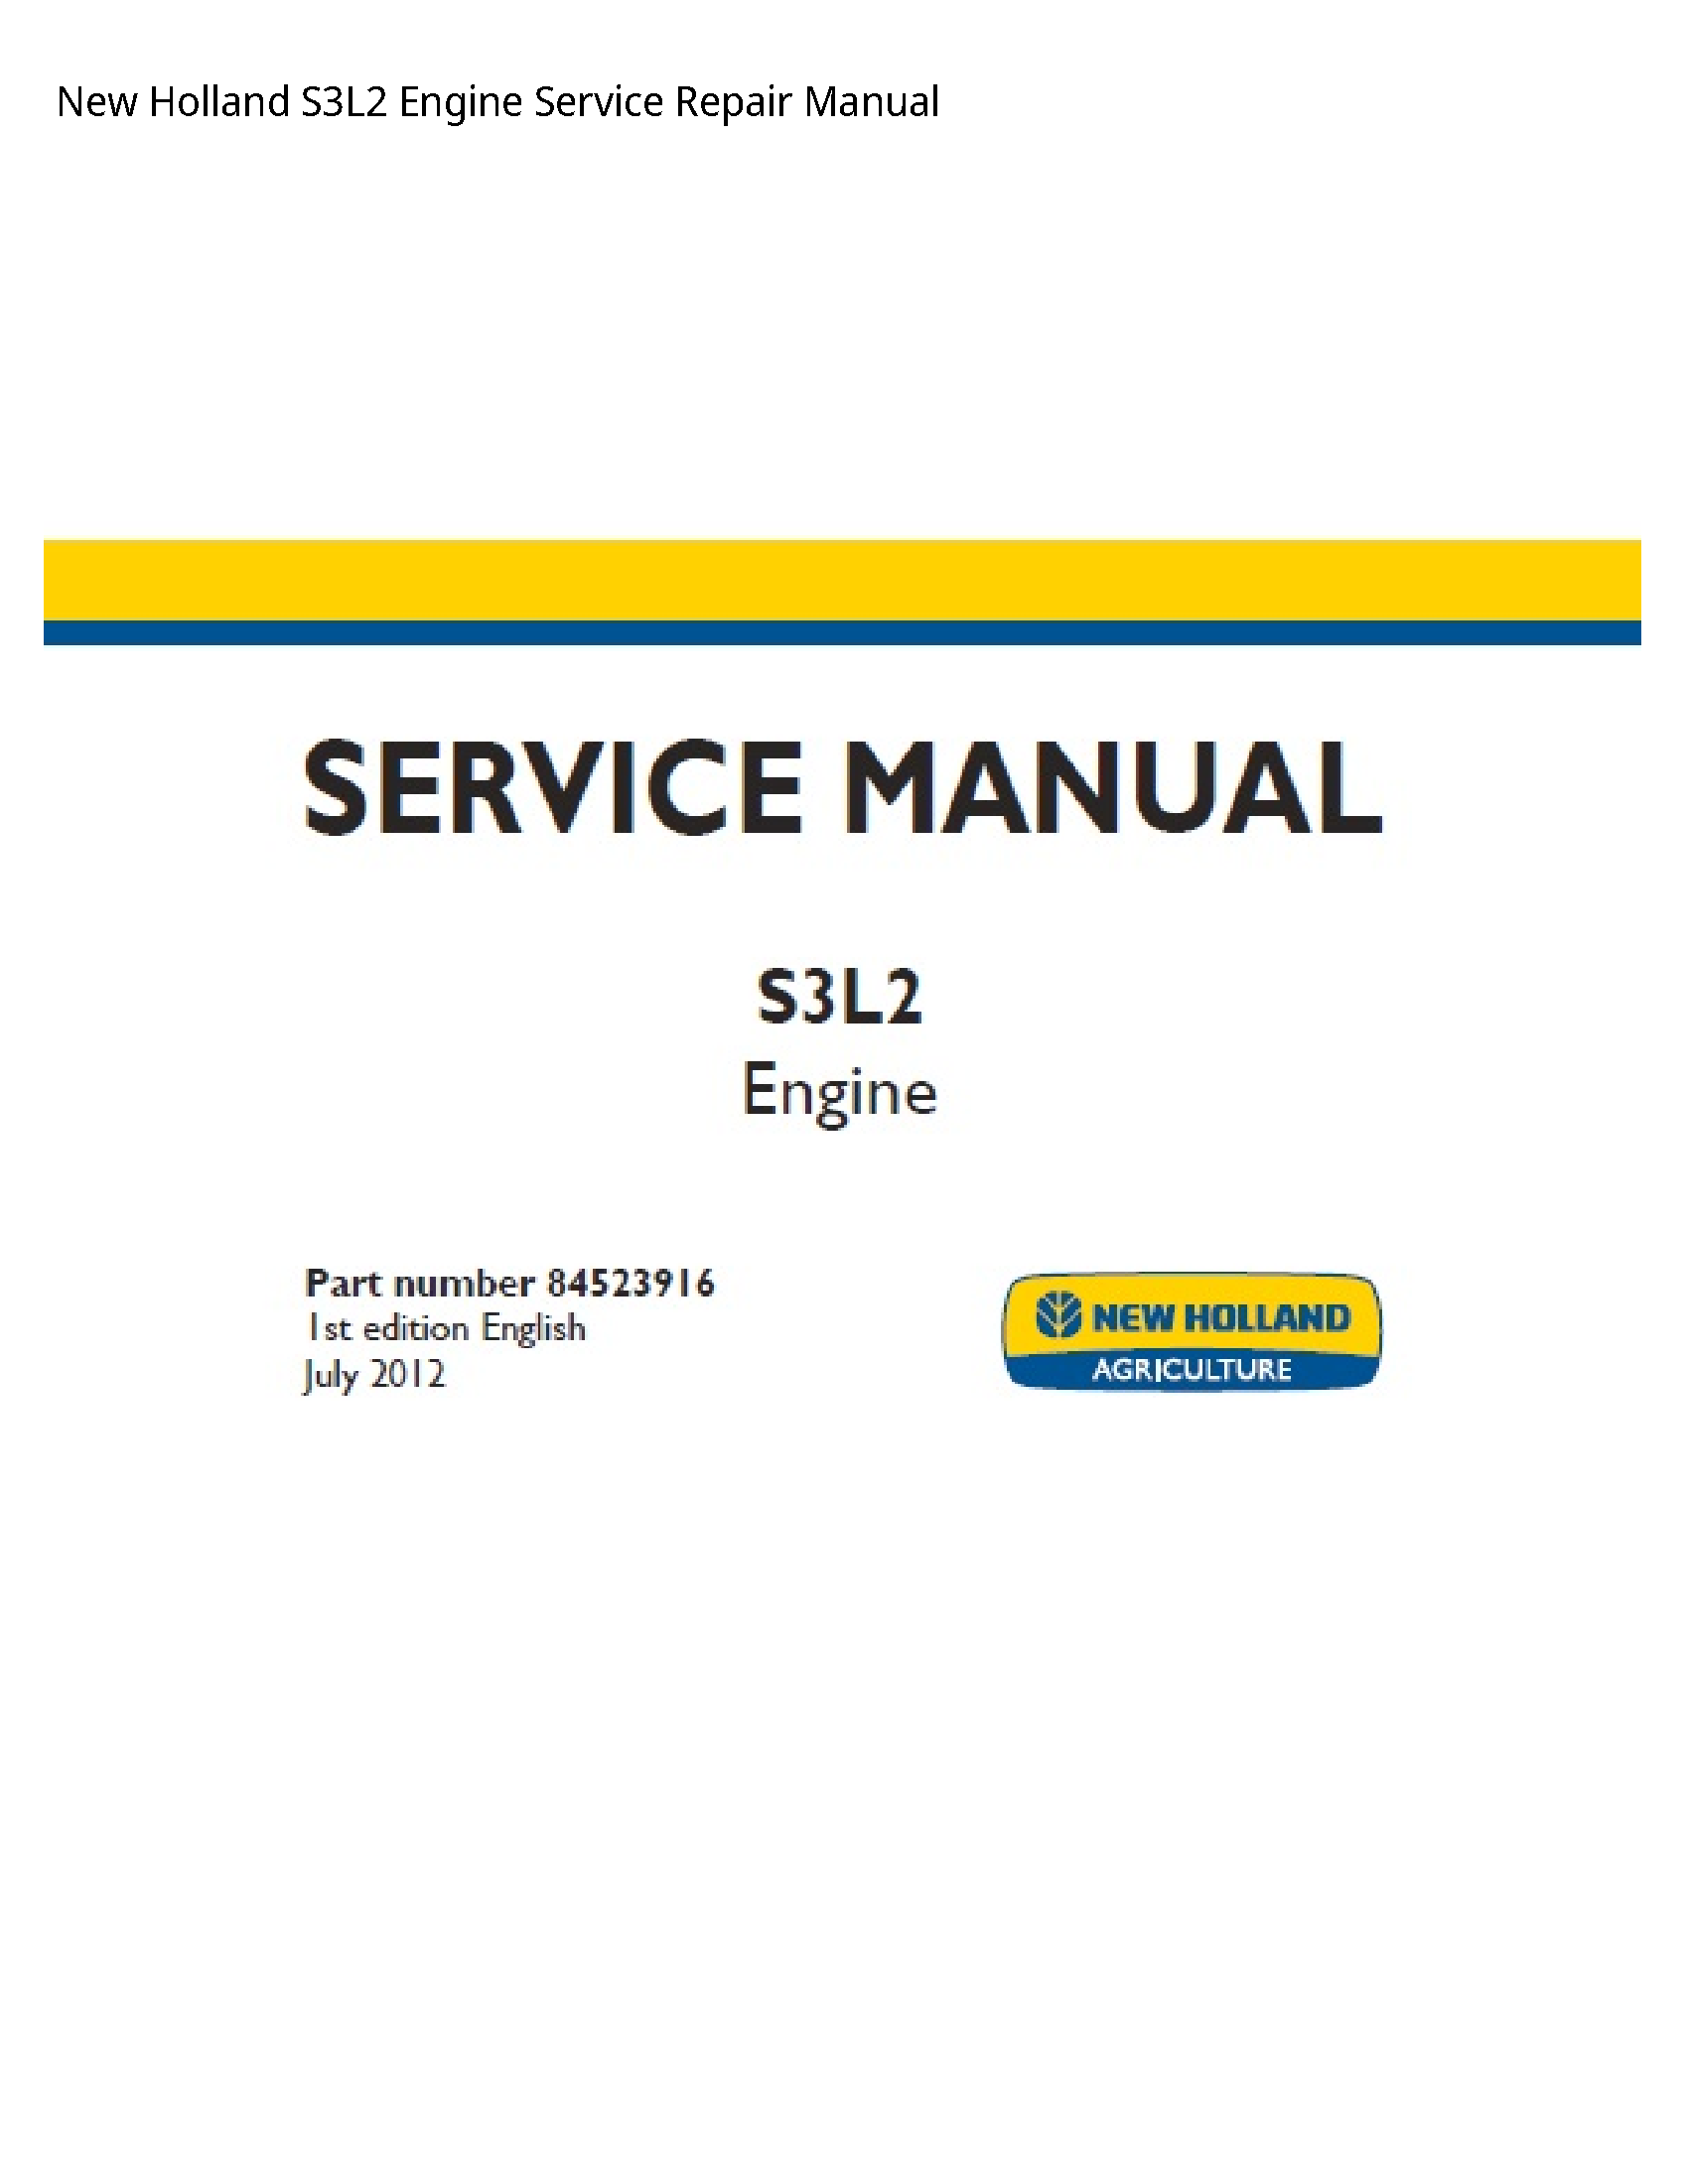 New Holland S3L2 Engine manual